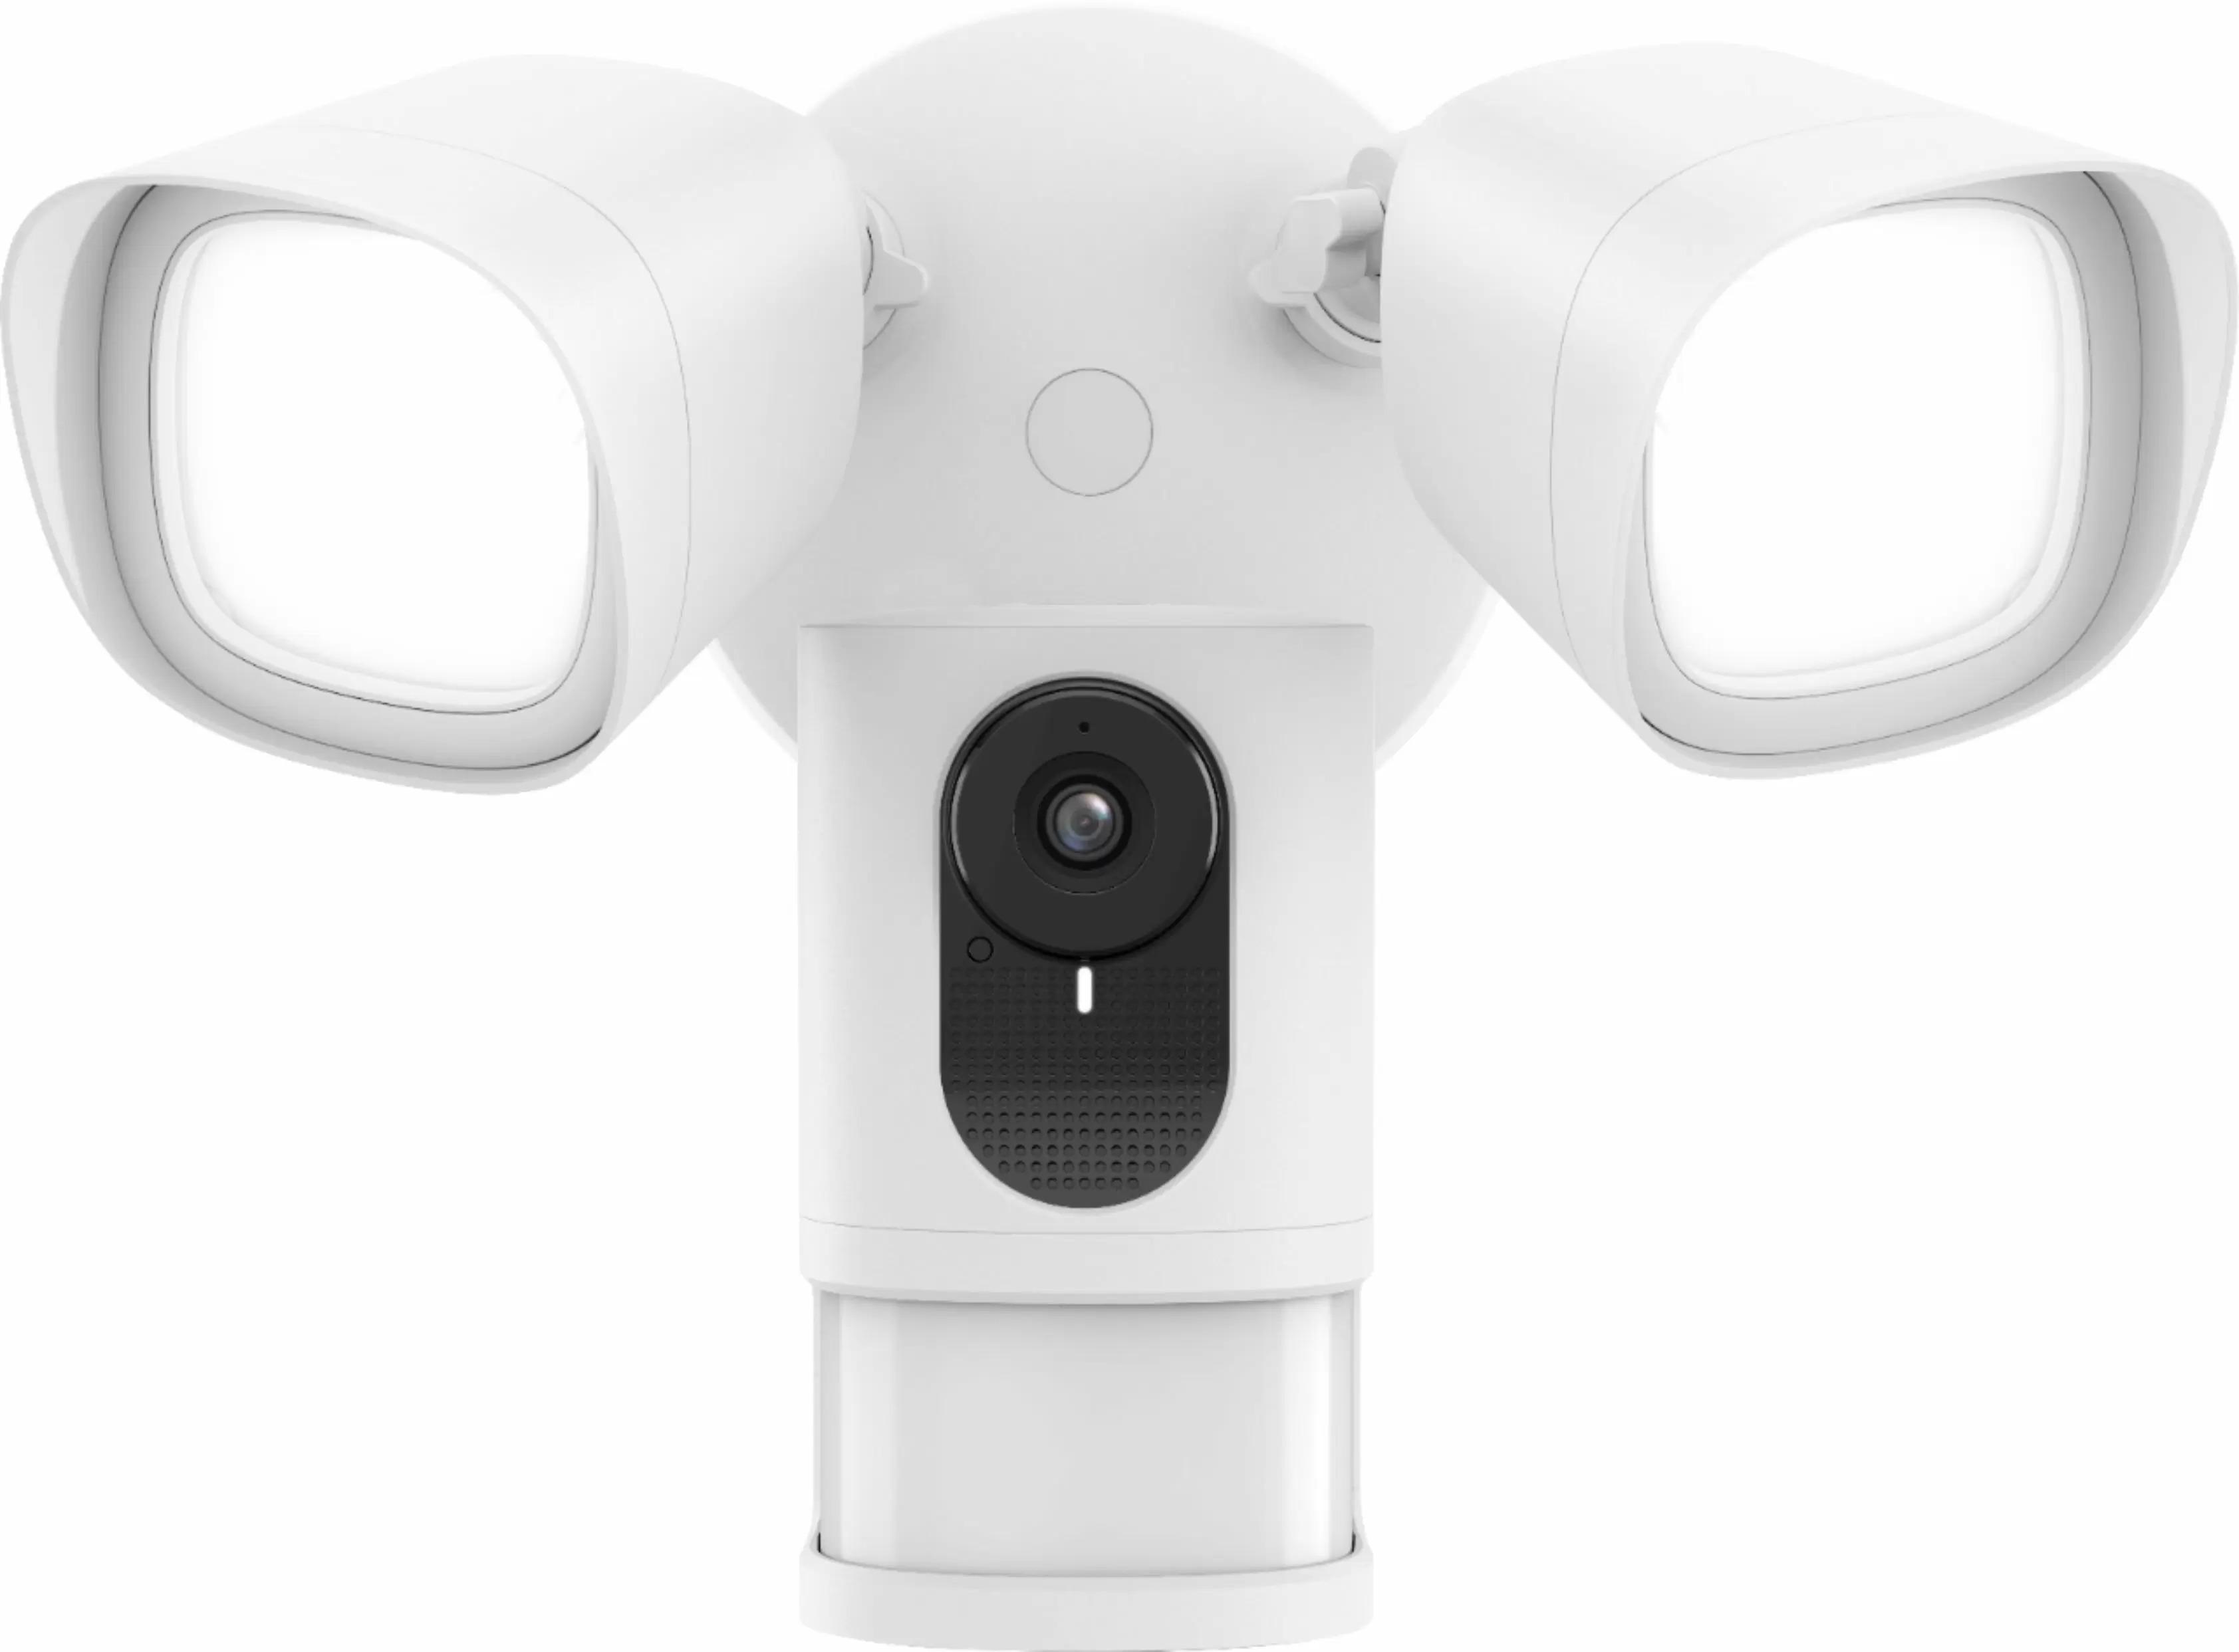 Eufy 1080p Outdoor Wireless Floodlight Security Camera for $137.48 Shipped